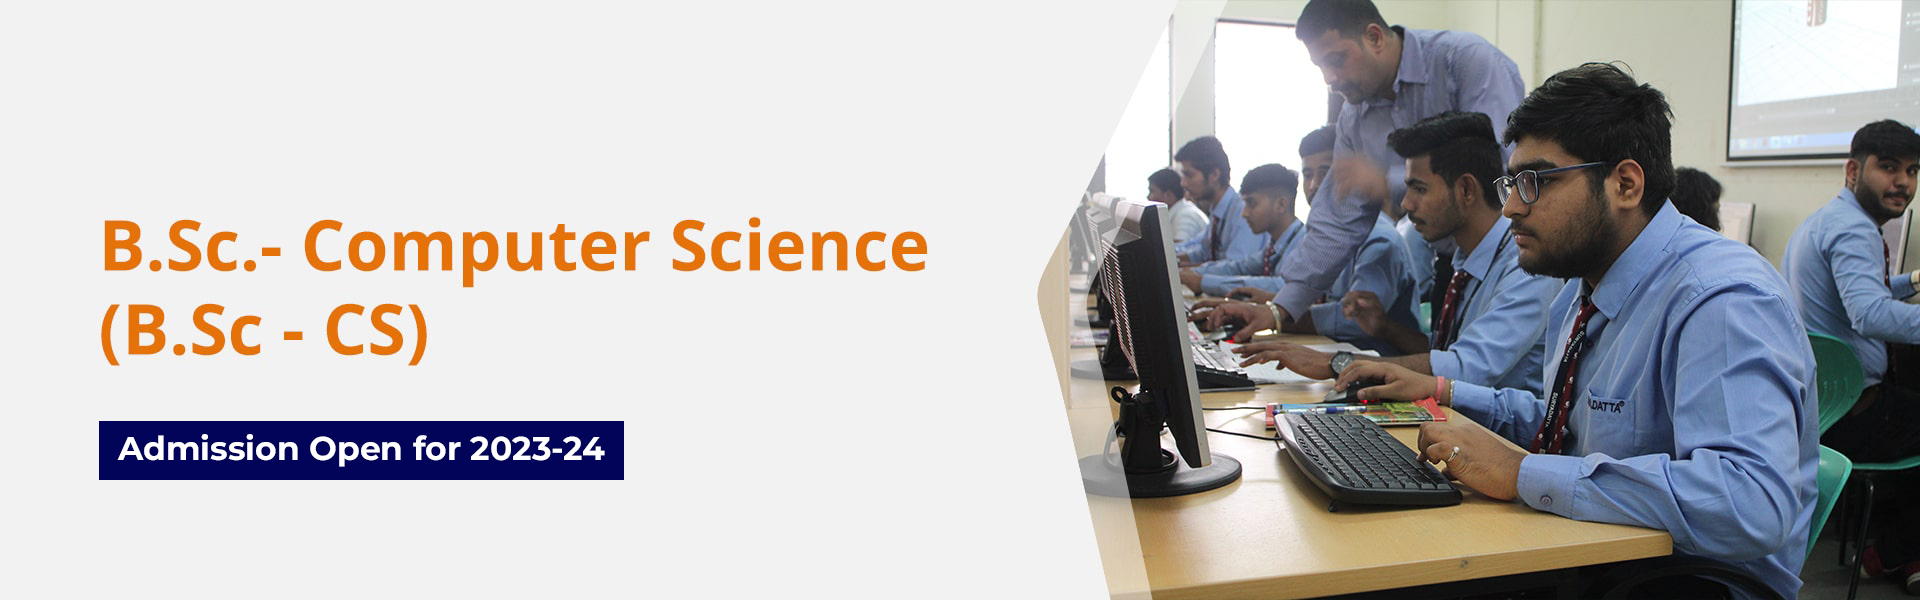 BSc in Computer Science course in Pune